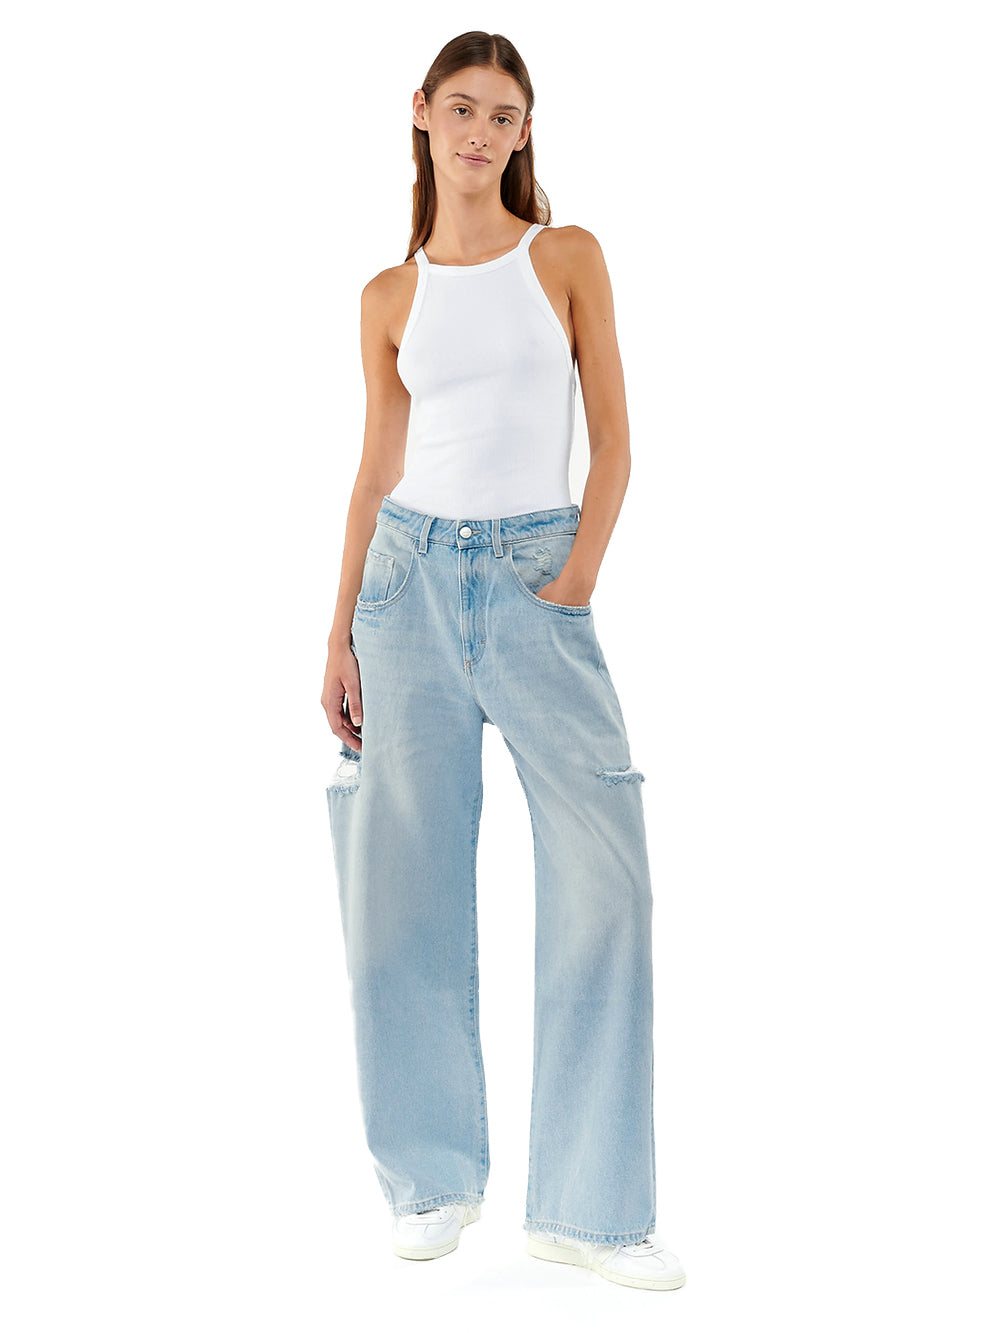 Poppy Eco women's jeans with cuts on the sides